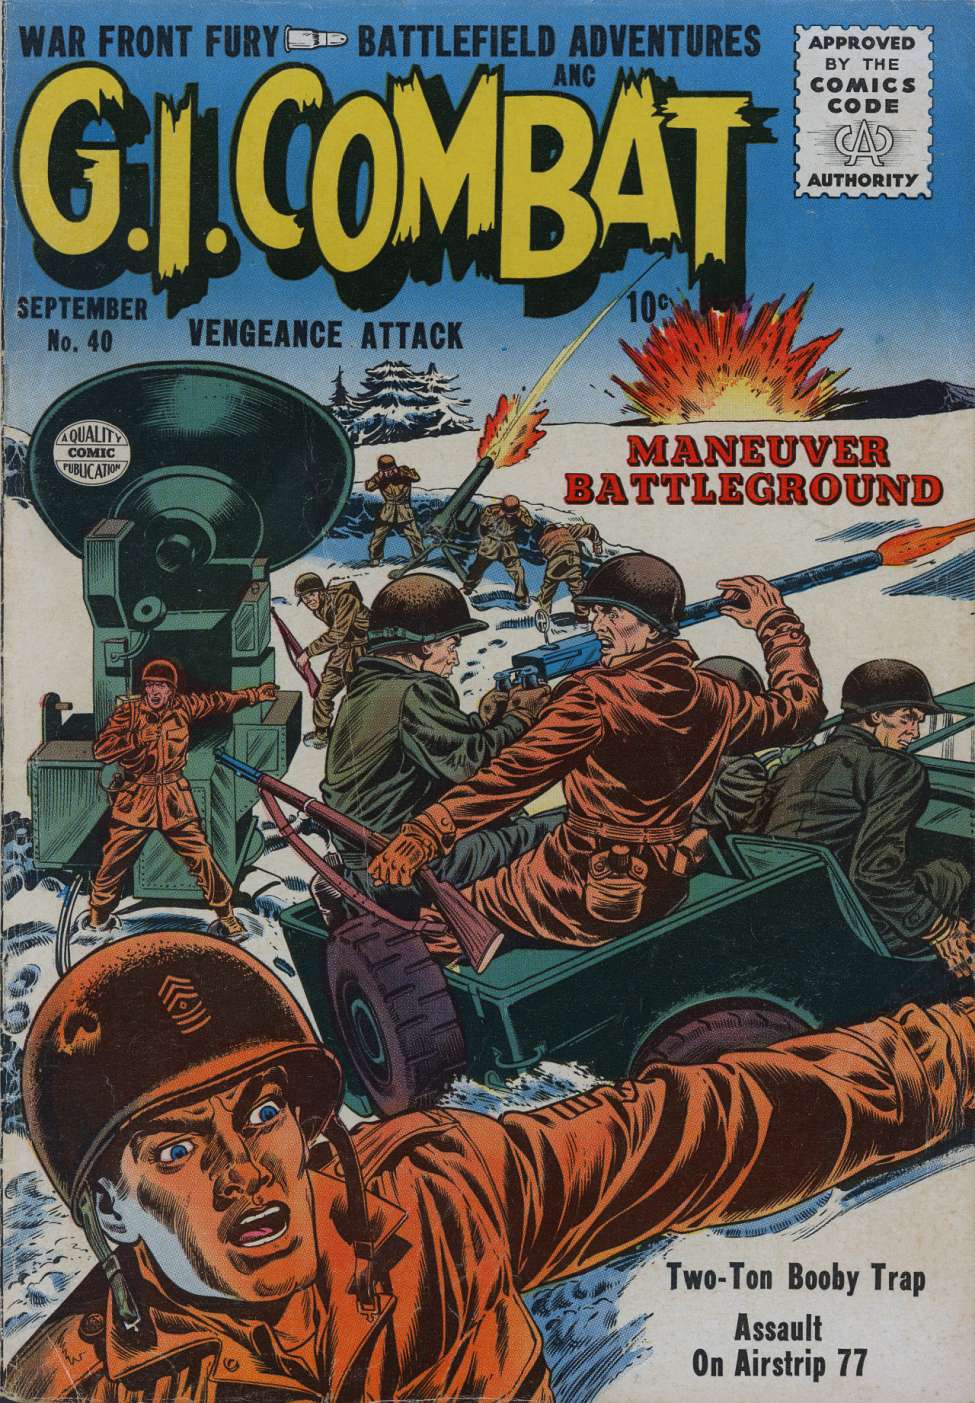 Book Cover For G.I. Combat 40